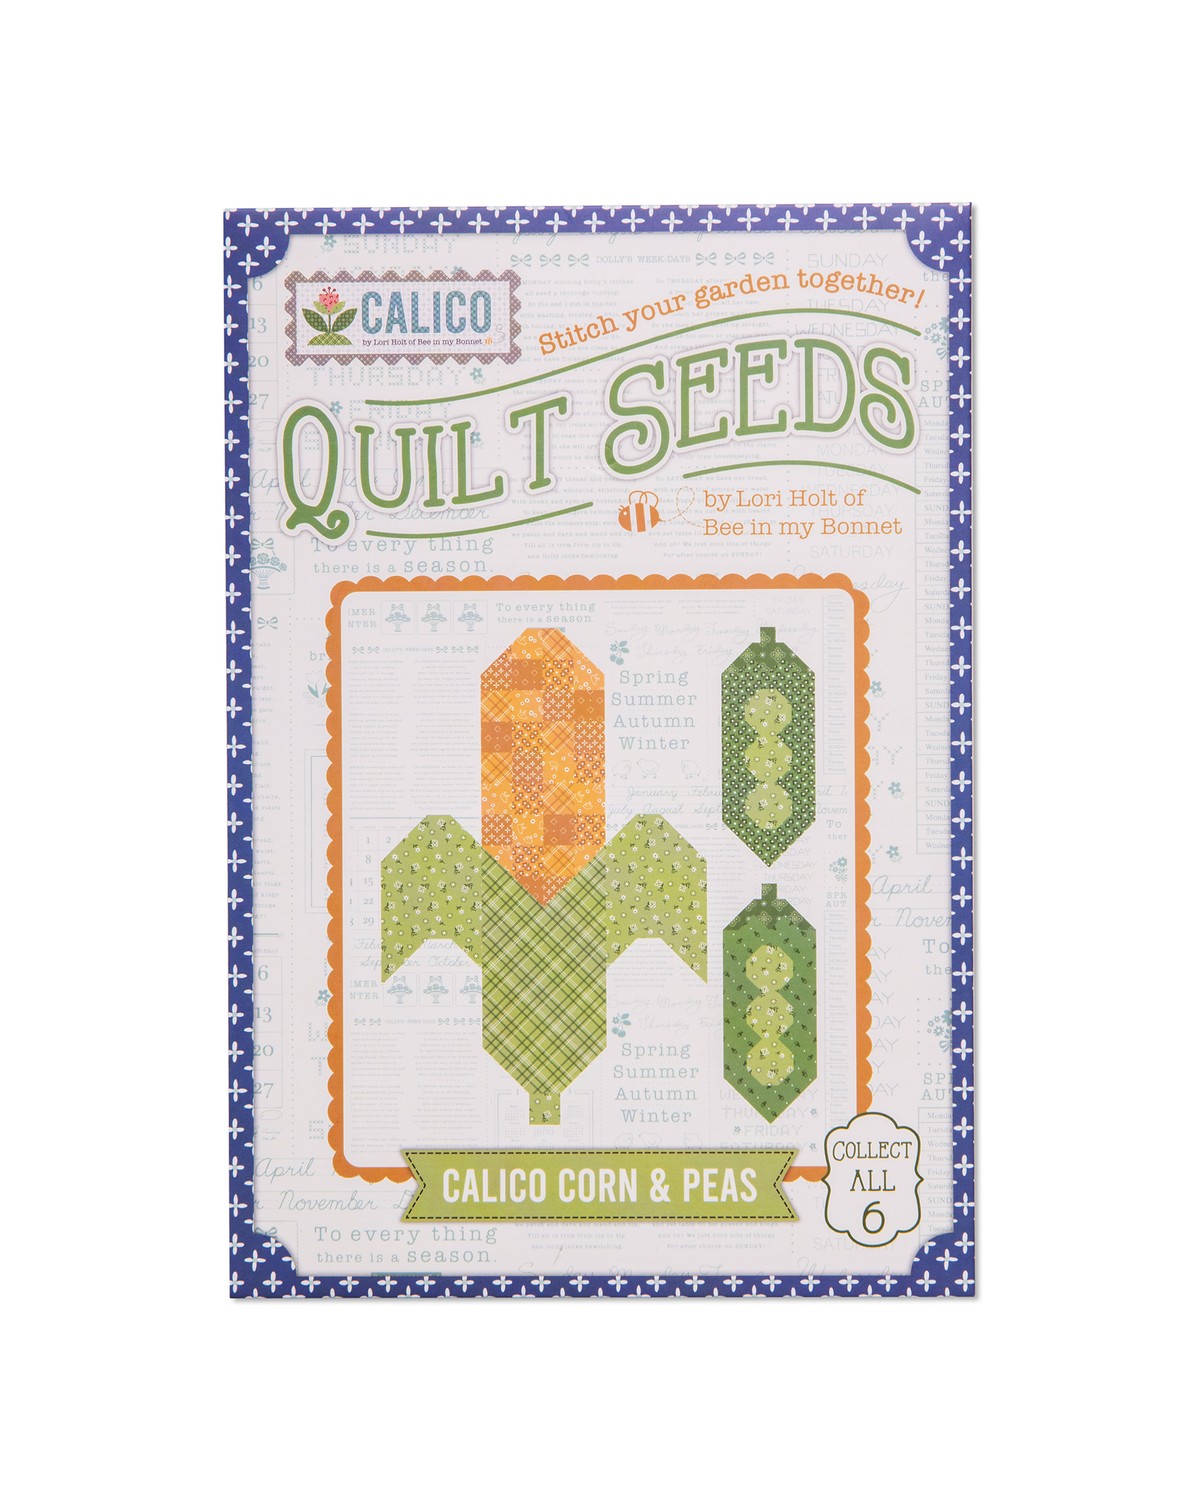 Lori Holt Calico Corn and Peas Quilt Seeds Pattern | ConnectingThreads.com